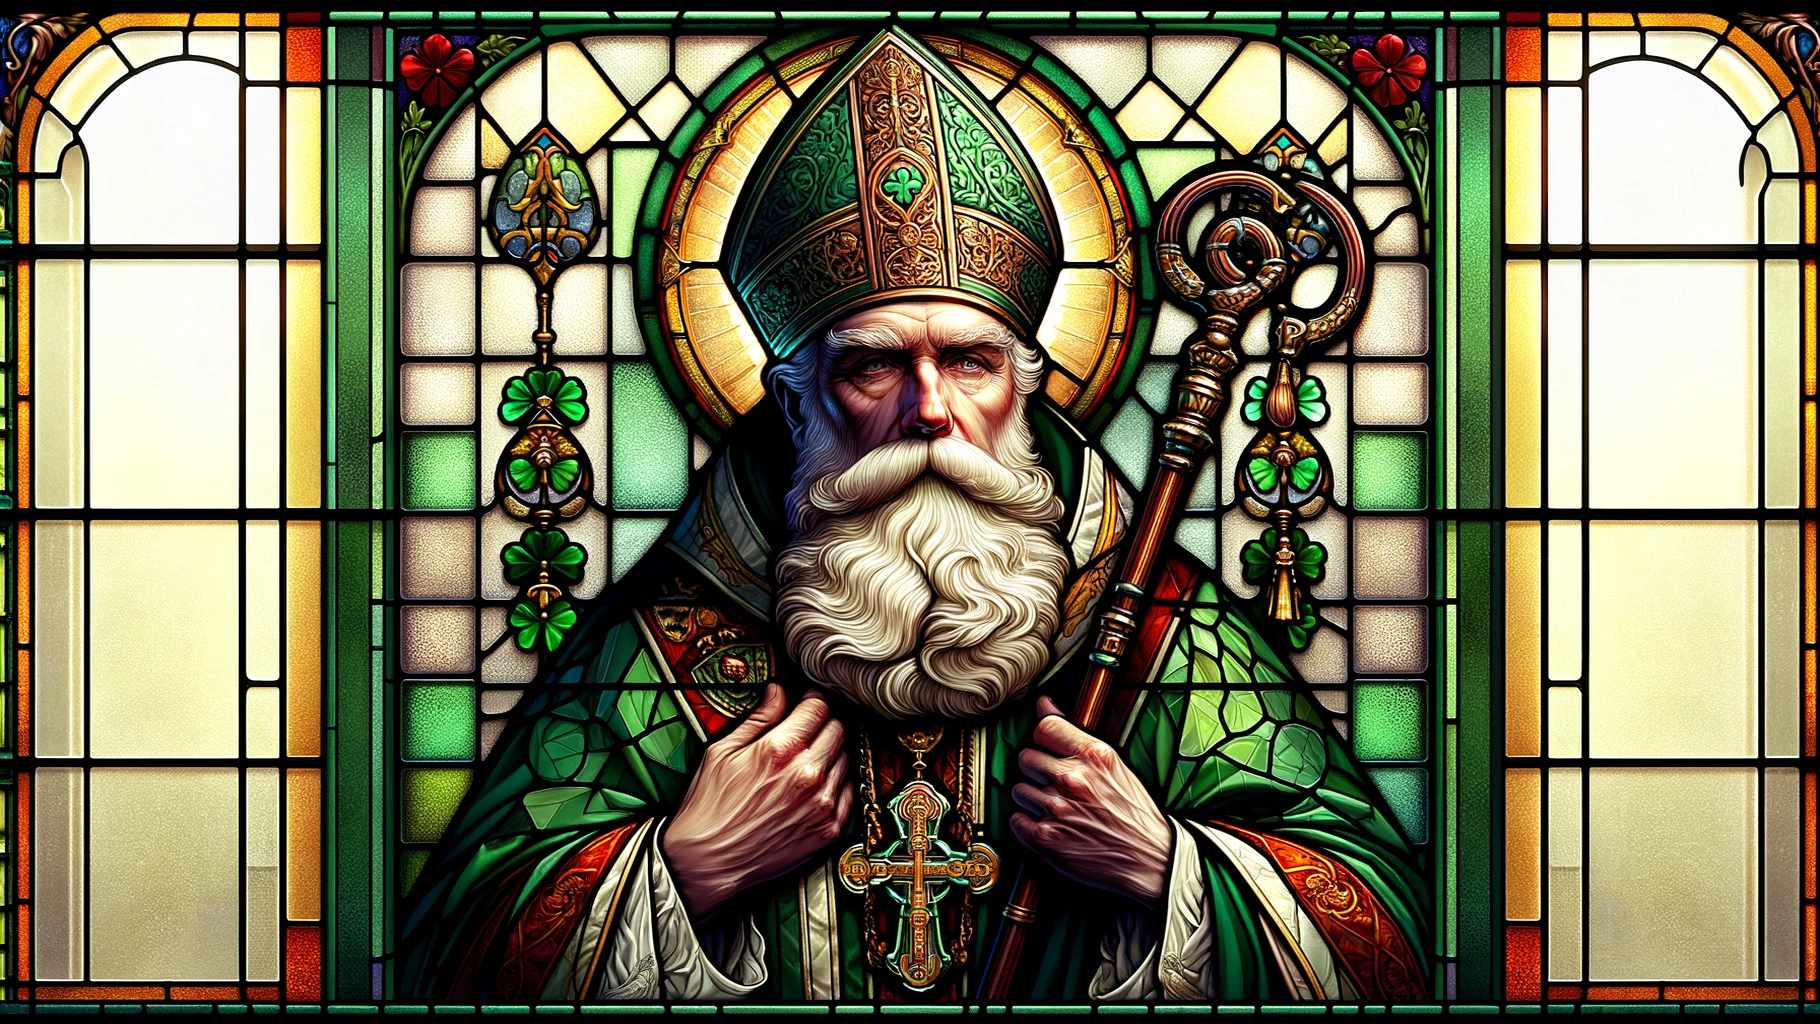 What Irish Saint's Feast Day Takes Place During Lent?